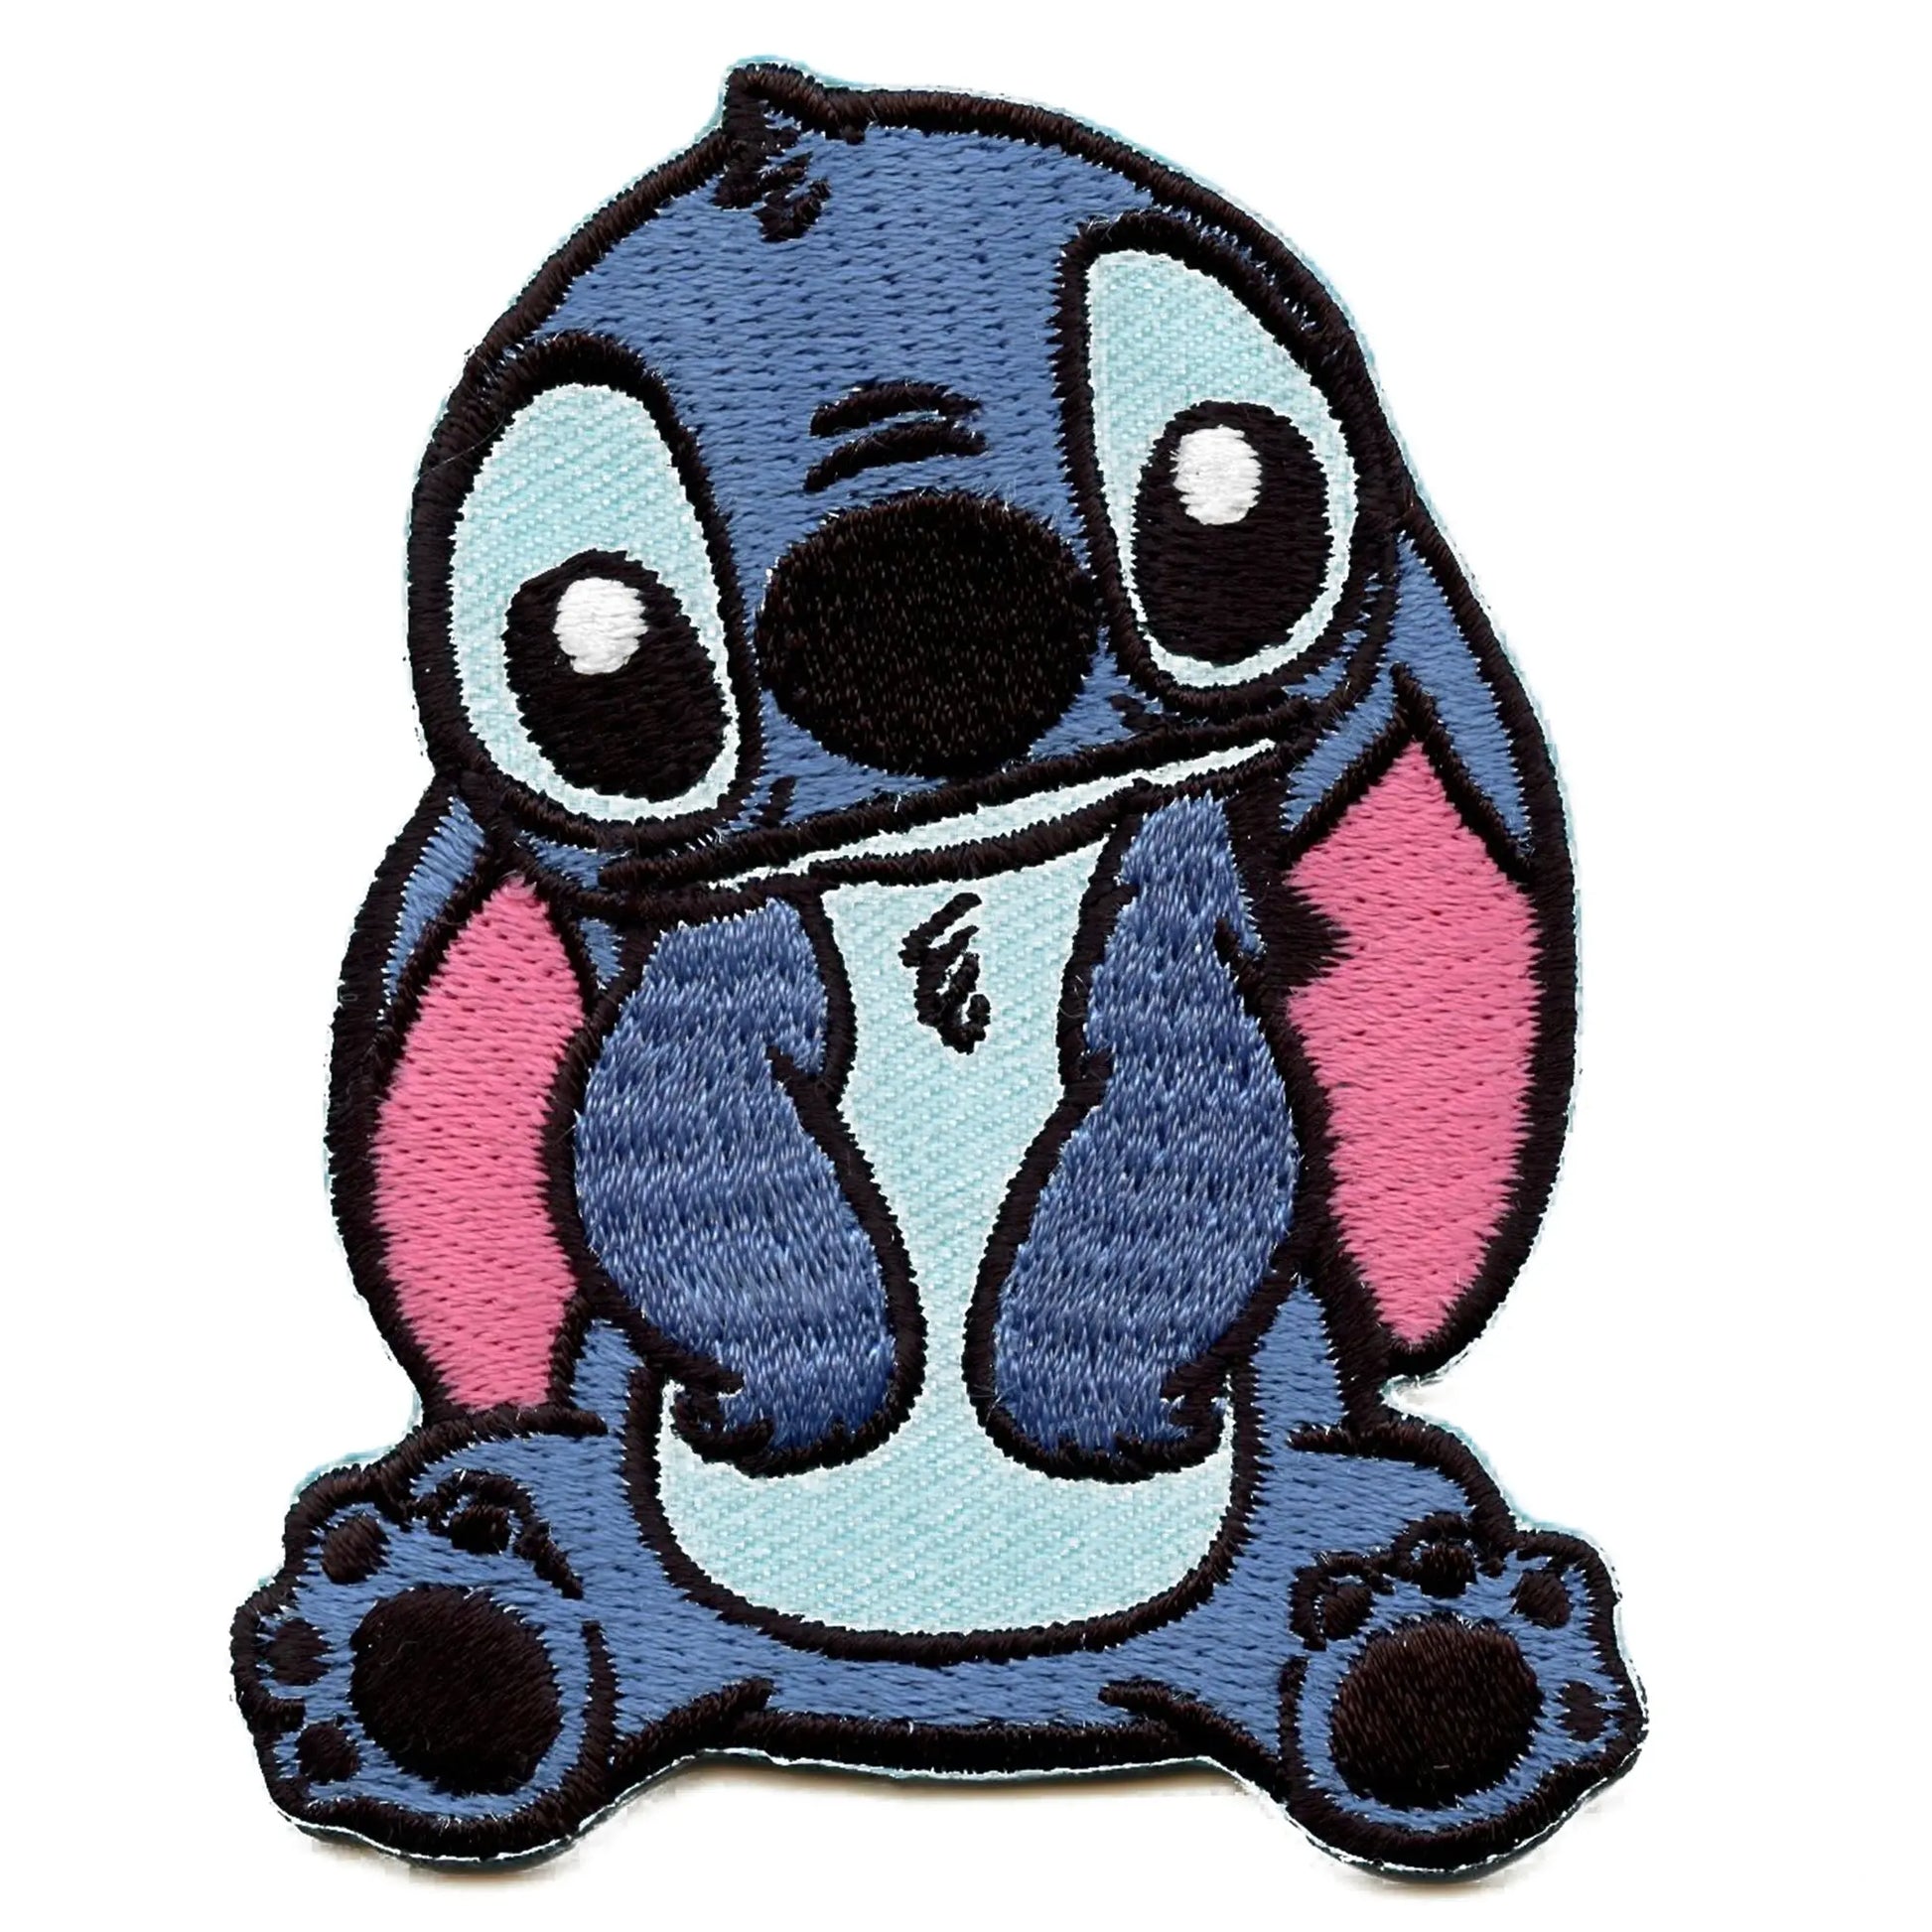 Lilo And Stitch Sitting Full Body Embroidered Iron On Patch 